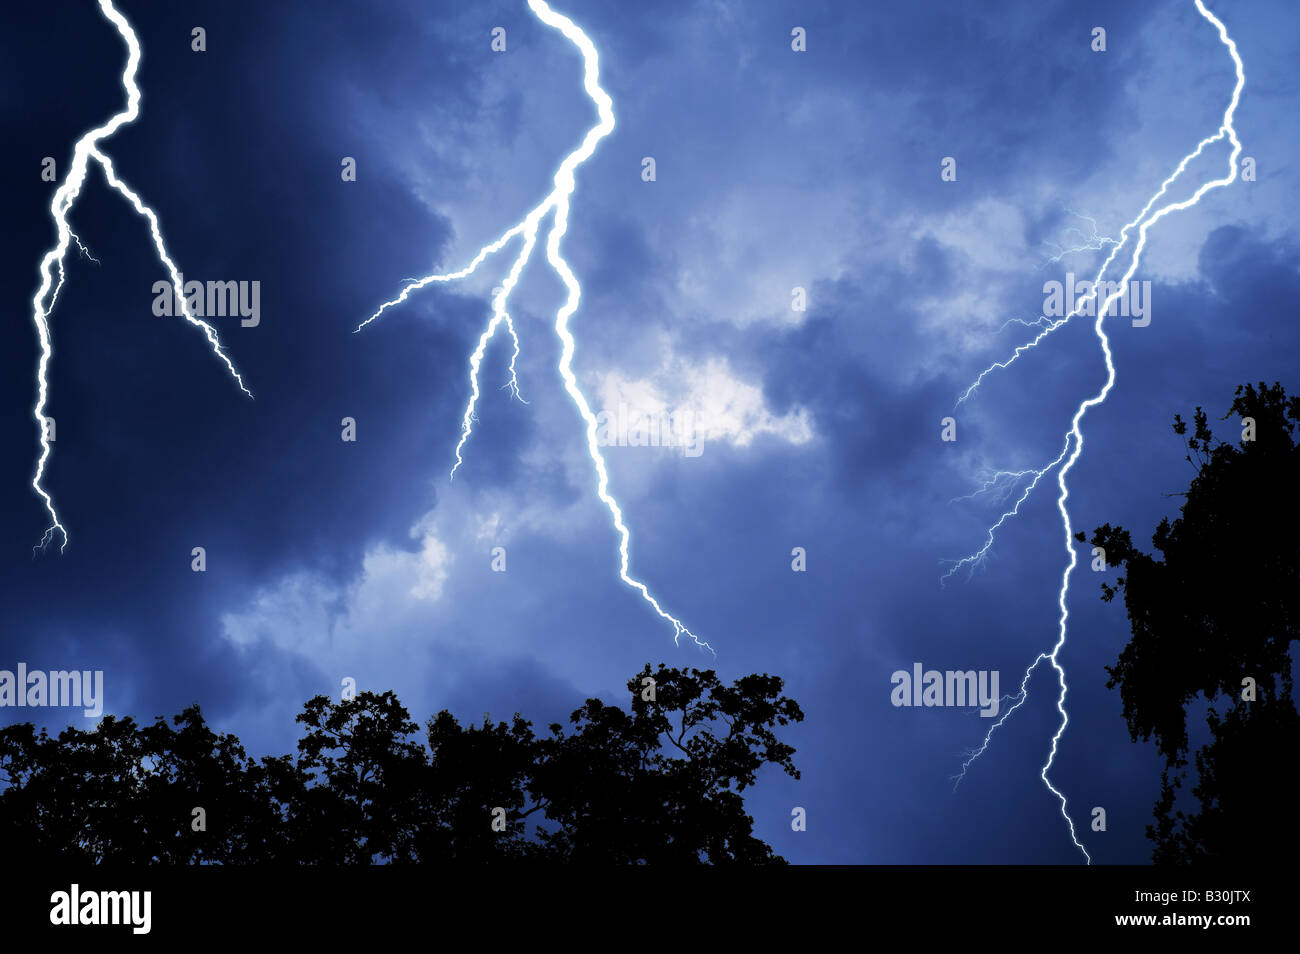 bolts of lightning in forest Stock Photo